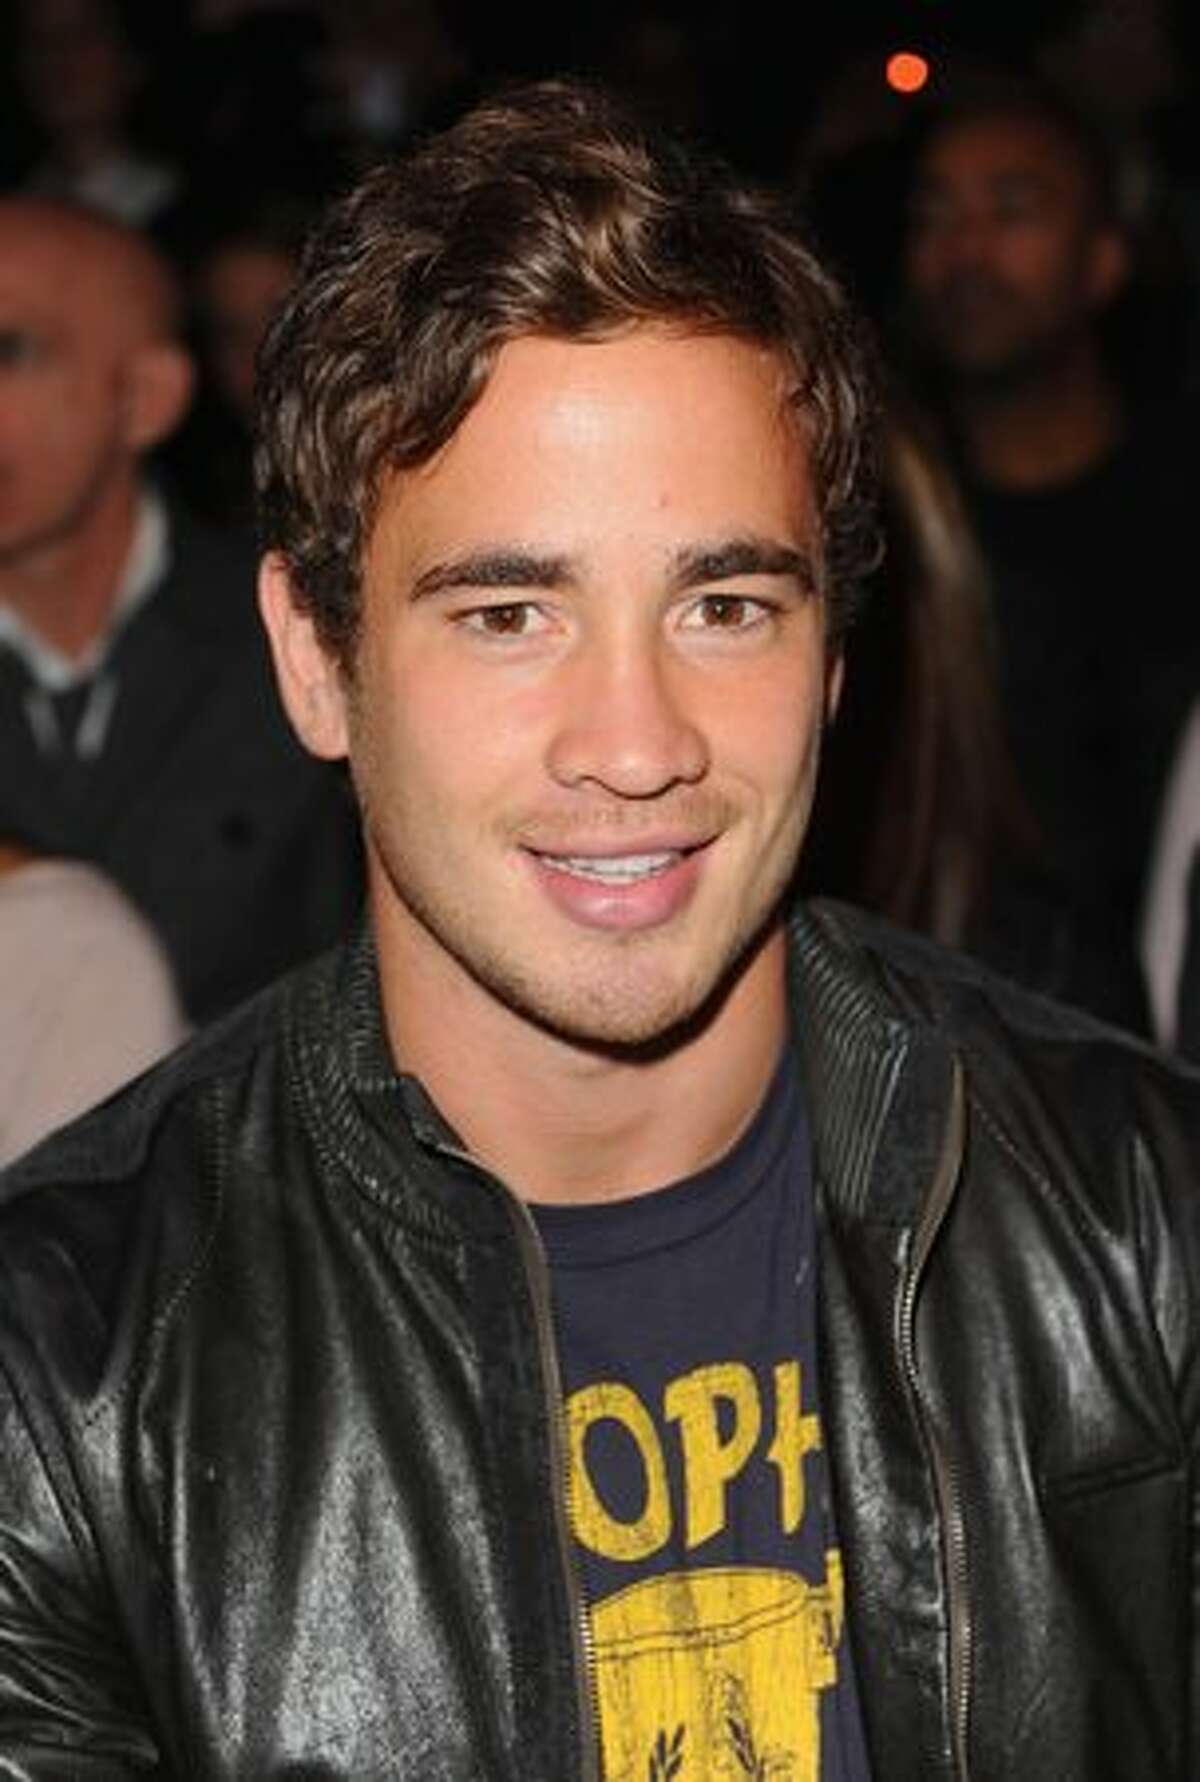 Athlete Danny Cipriani, who is an English rugby union footballer.